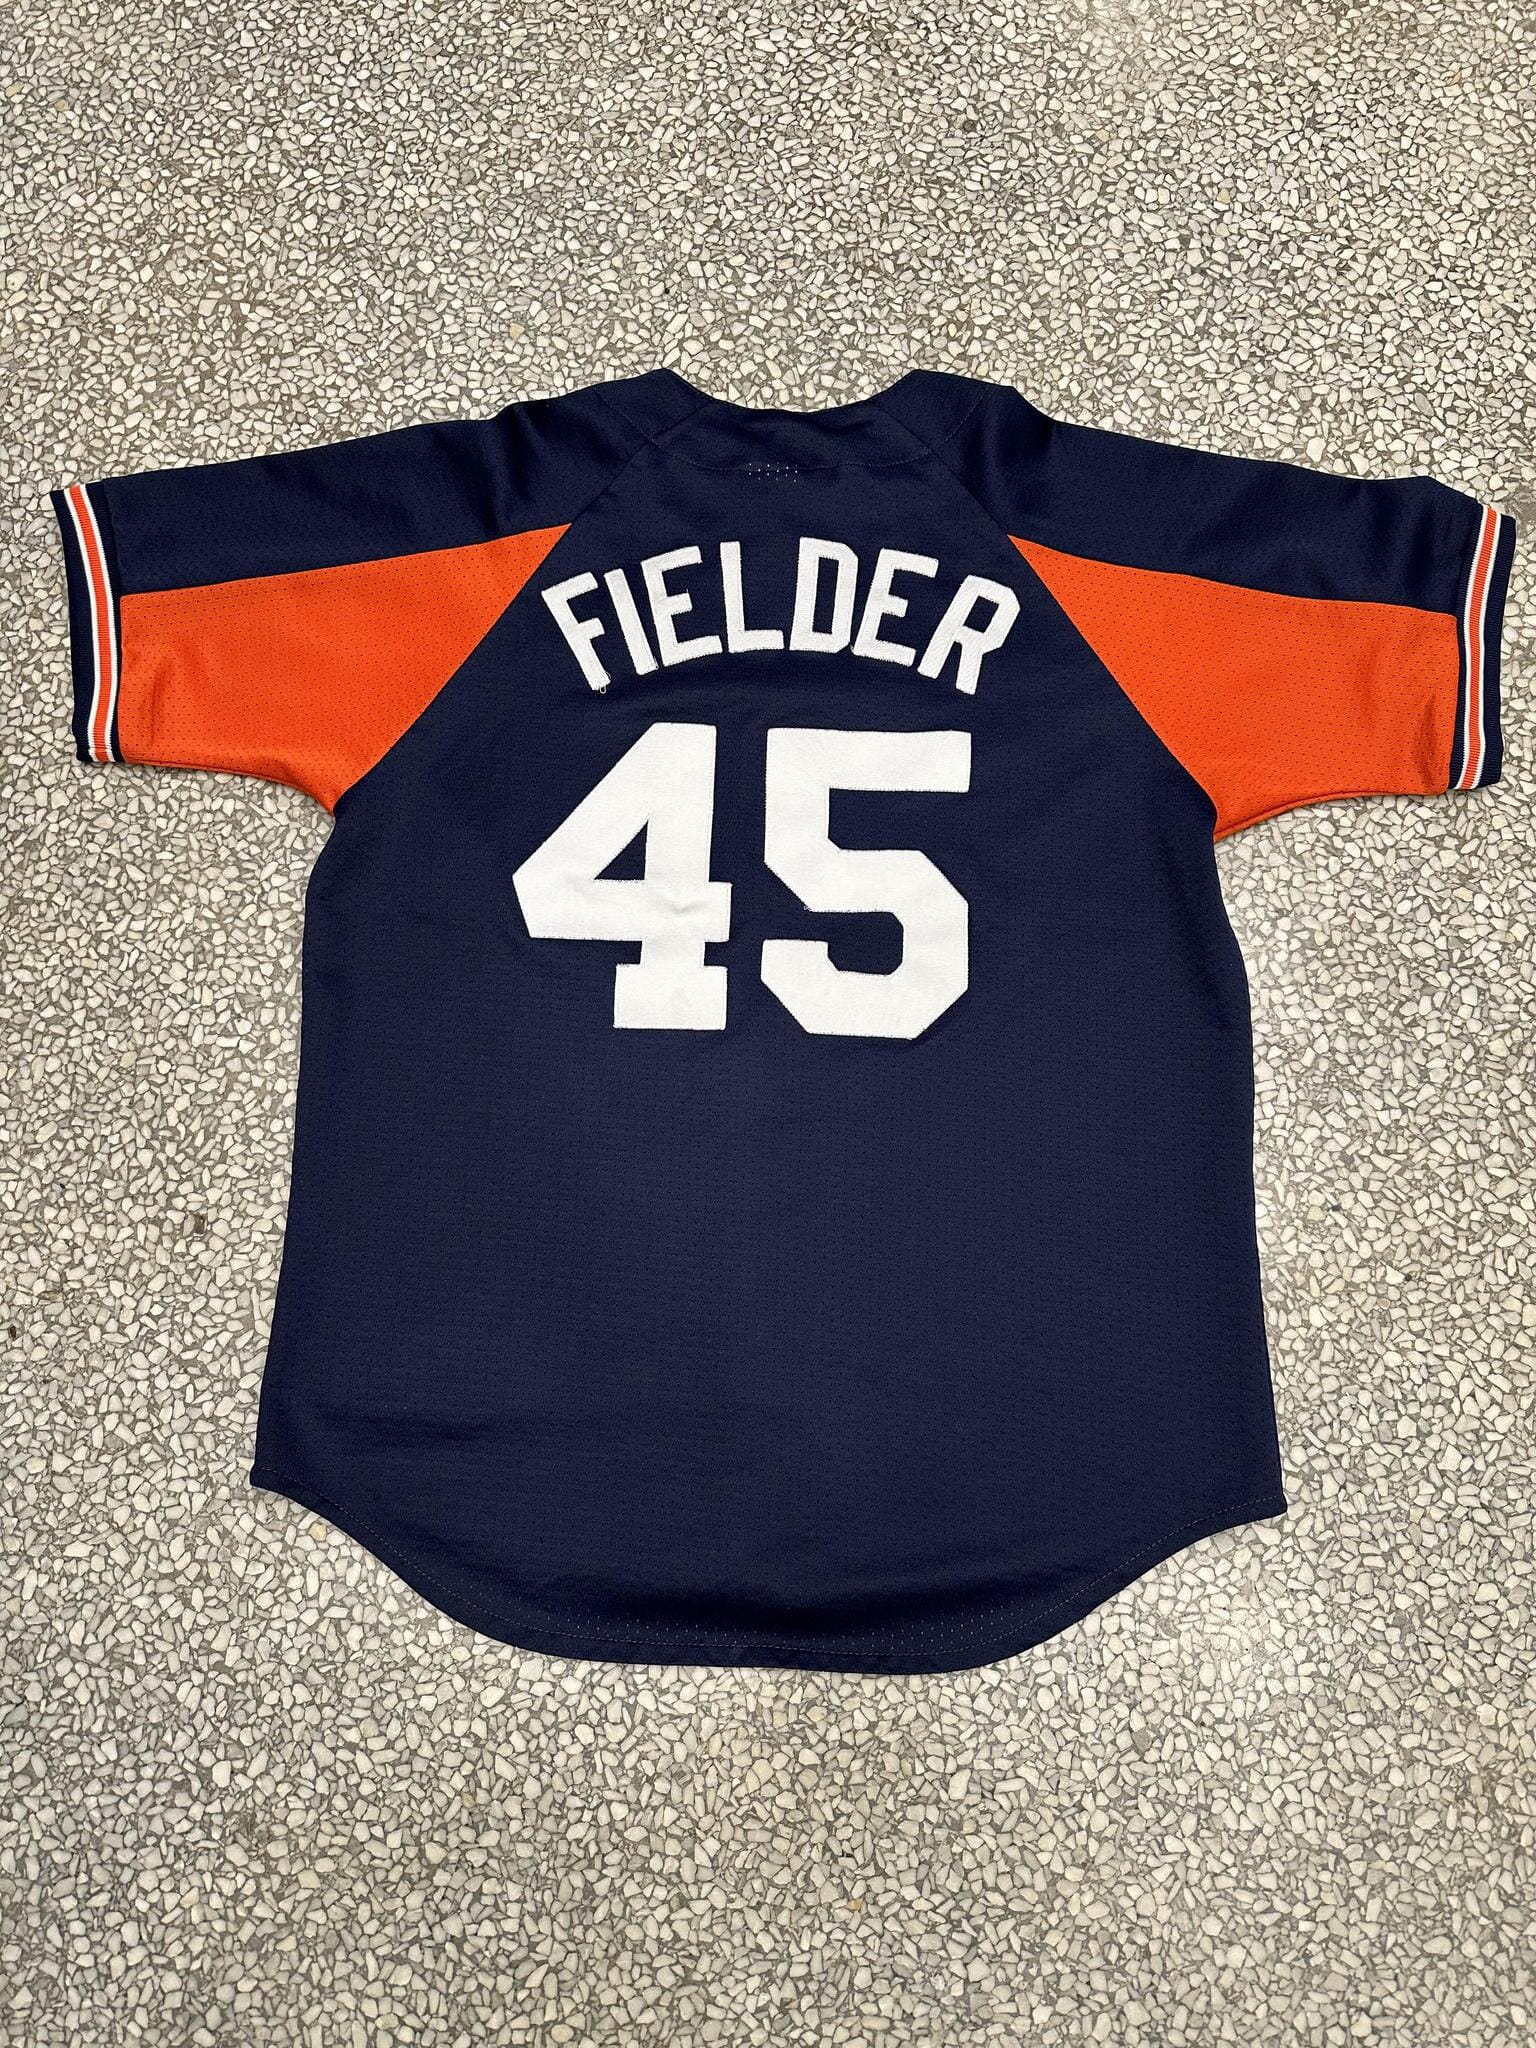 Majestic, Shirts, Cecil Fielder Detroit Tigers Majestic Cooperstown  Throwback Away Baseball Jersey